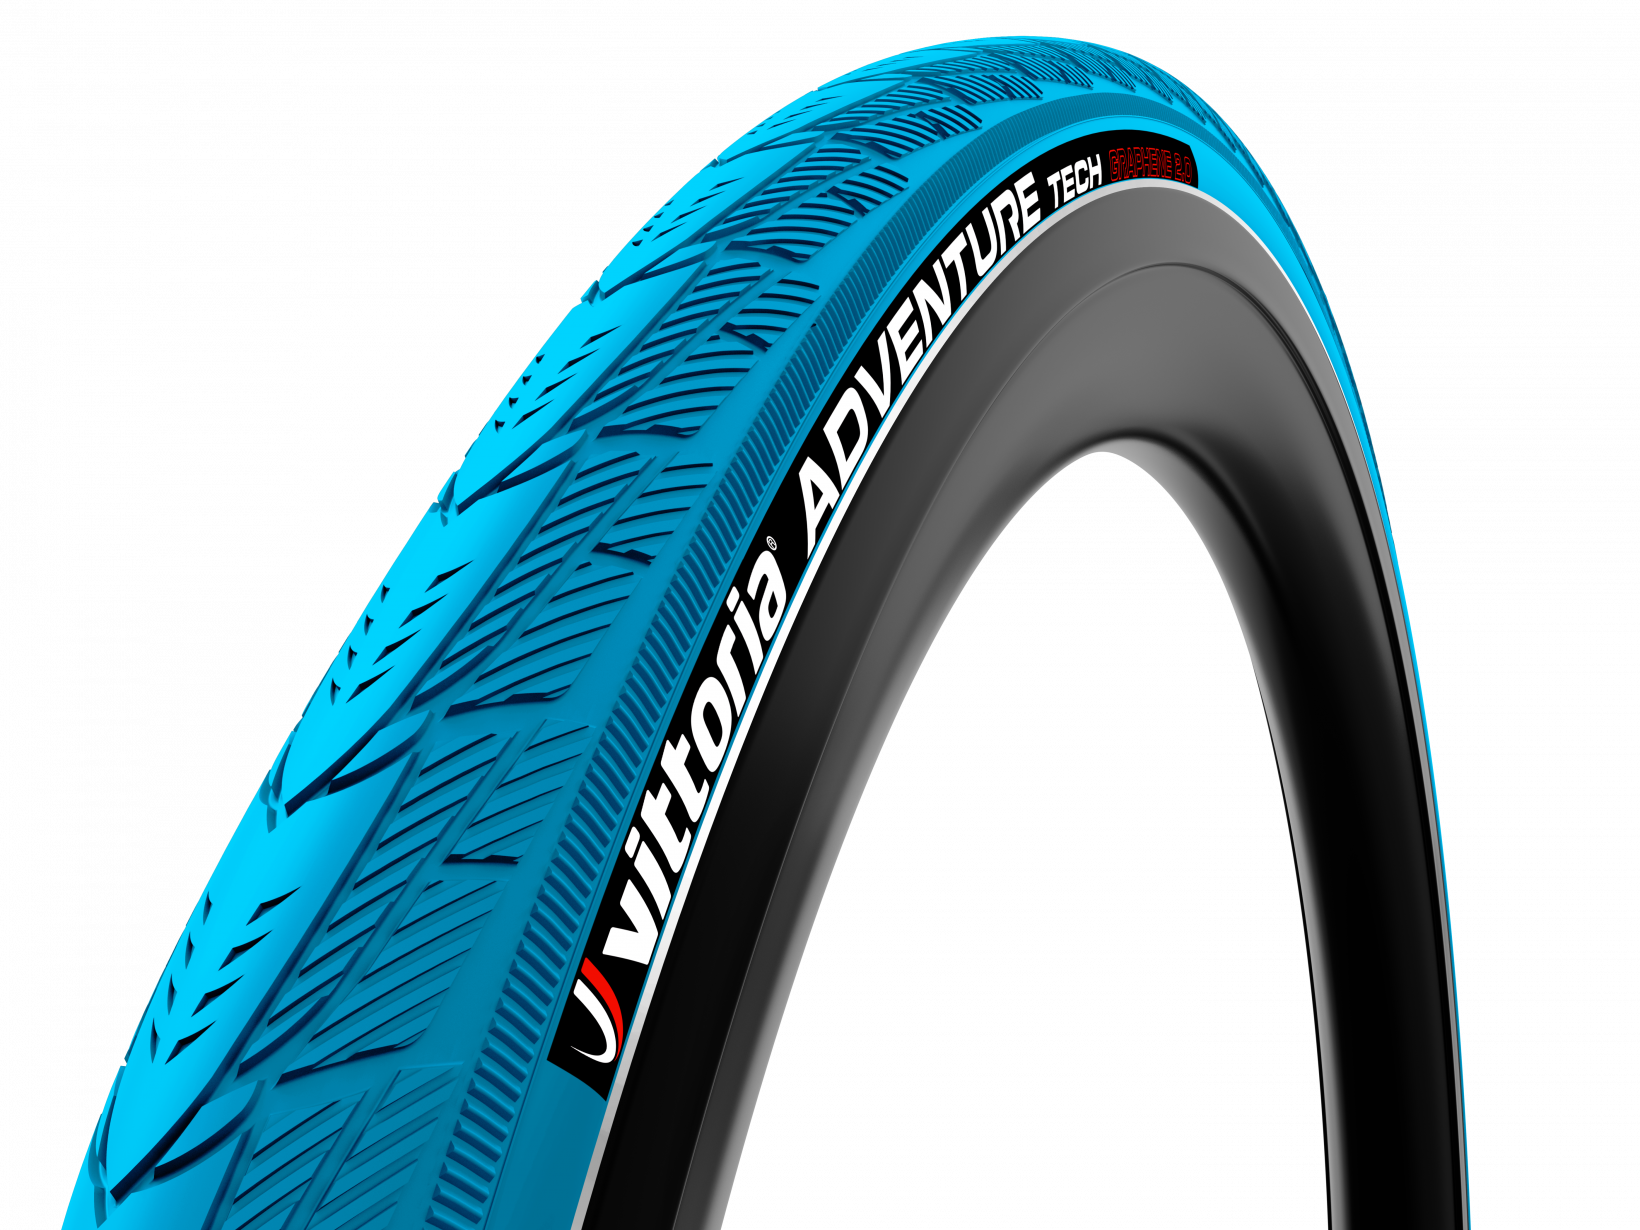 Vittoria blue tires can be rented.